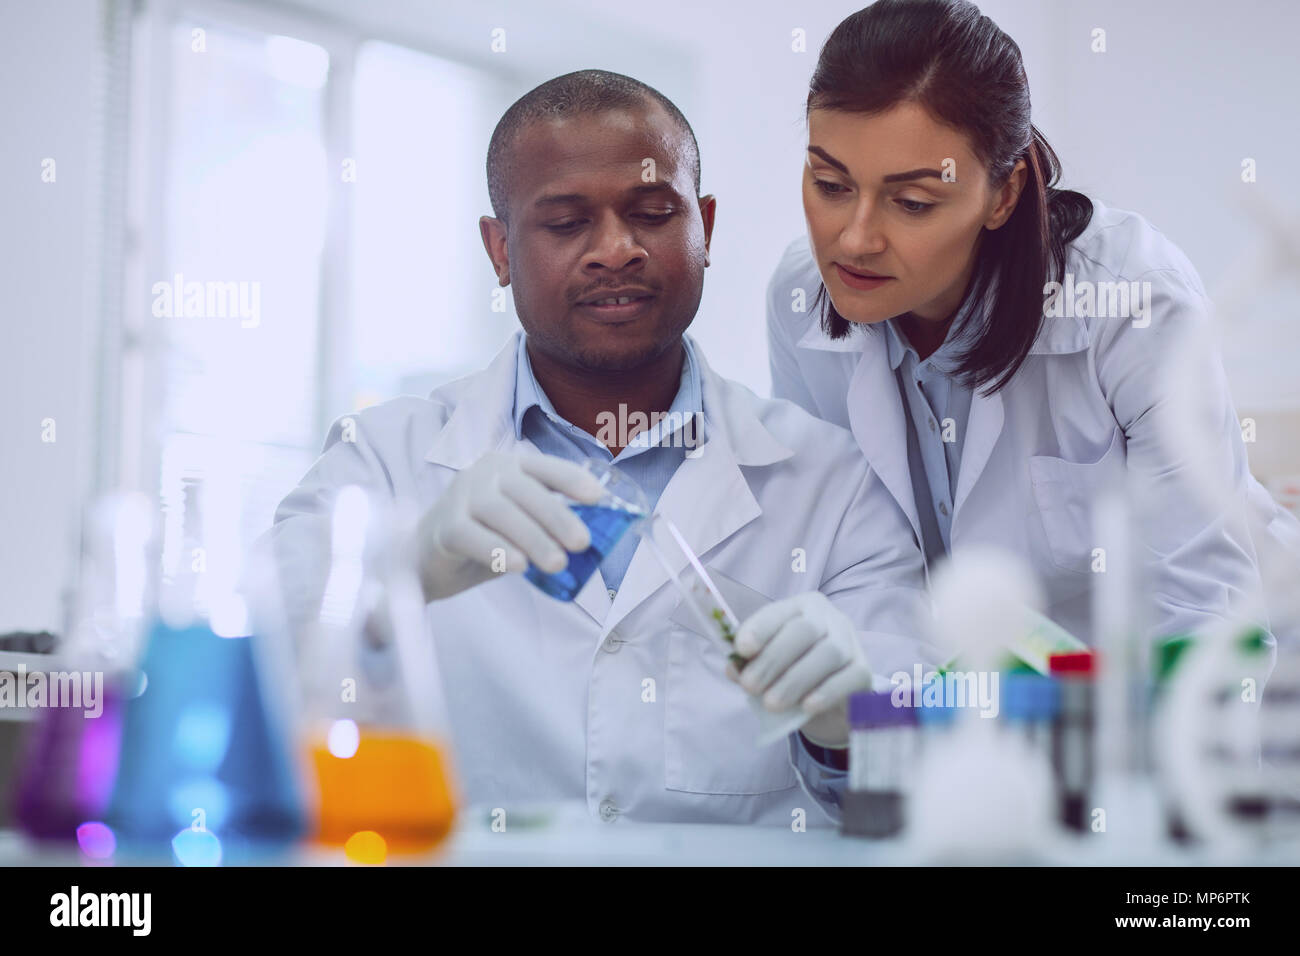 Alert scientist doing an important test Stock Photo